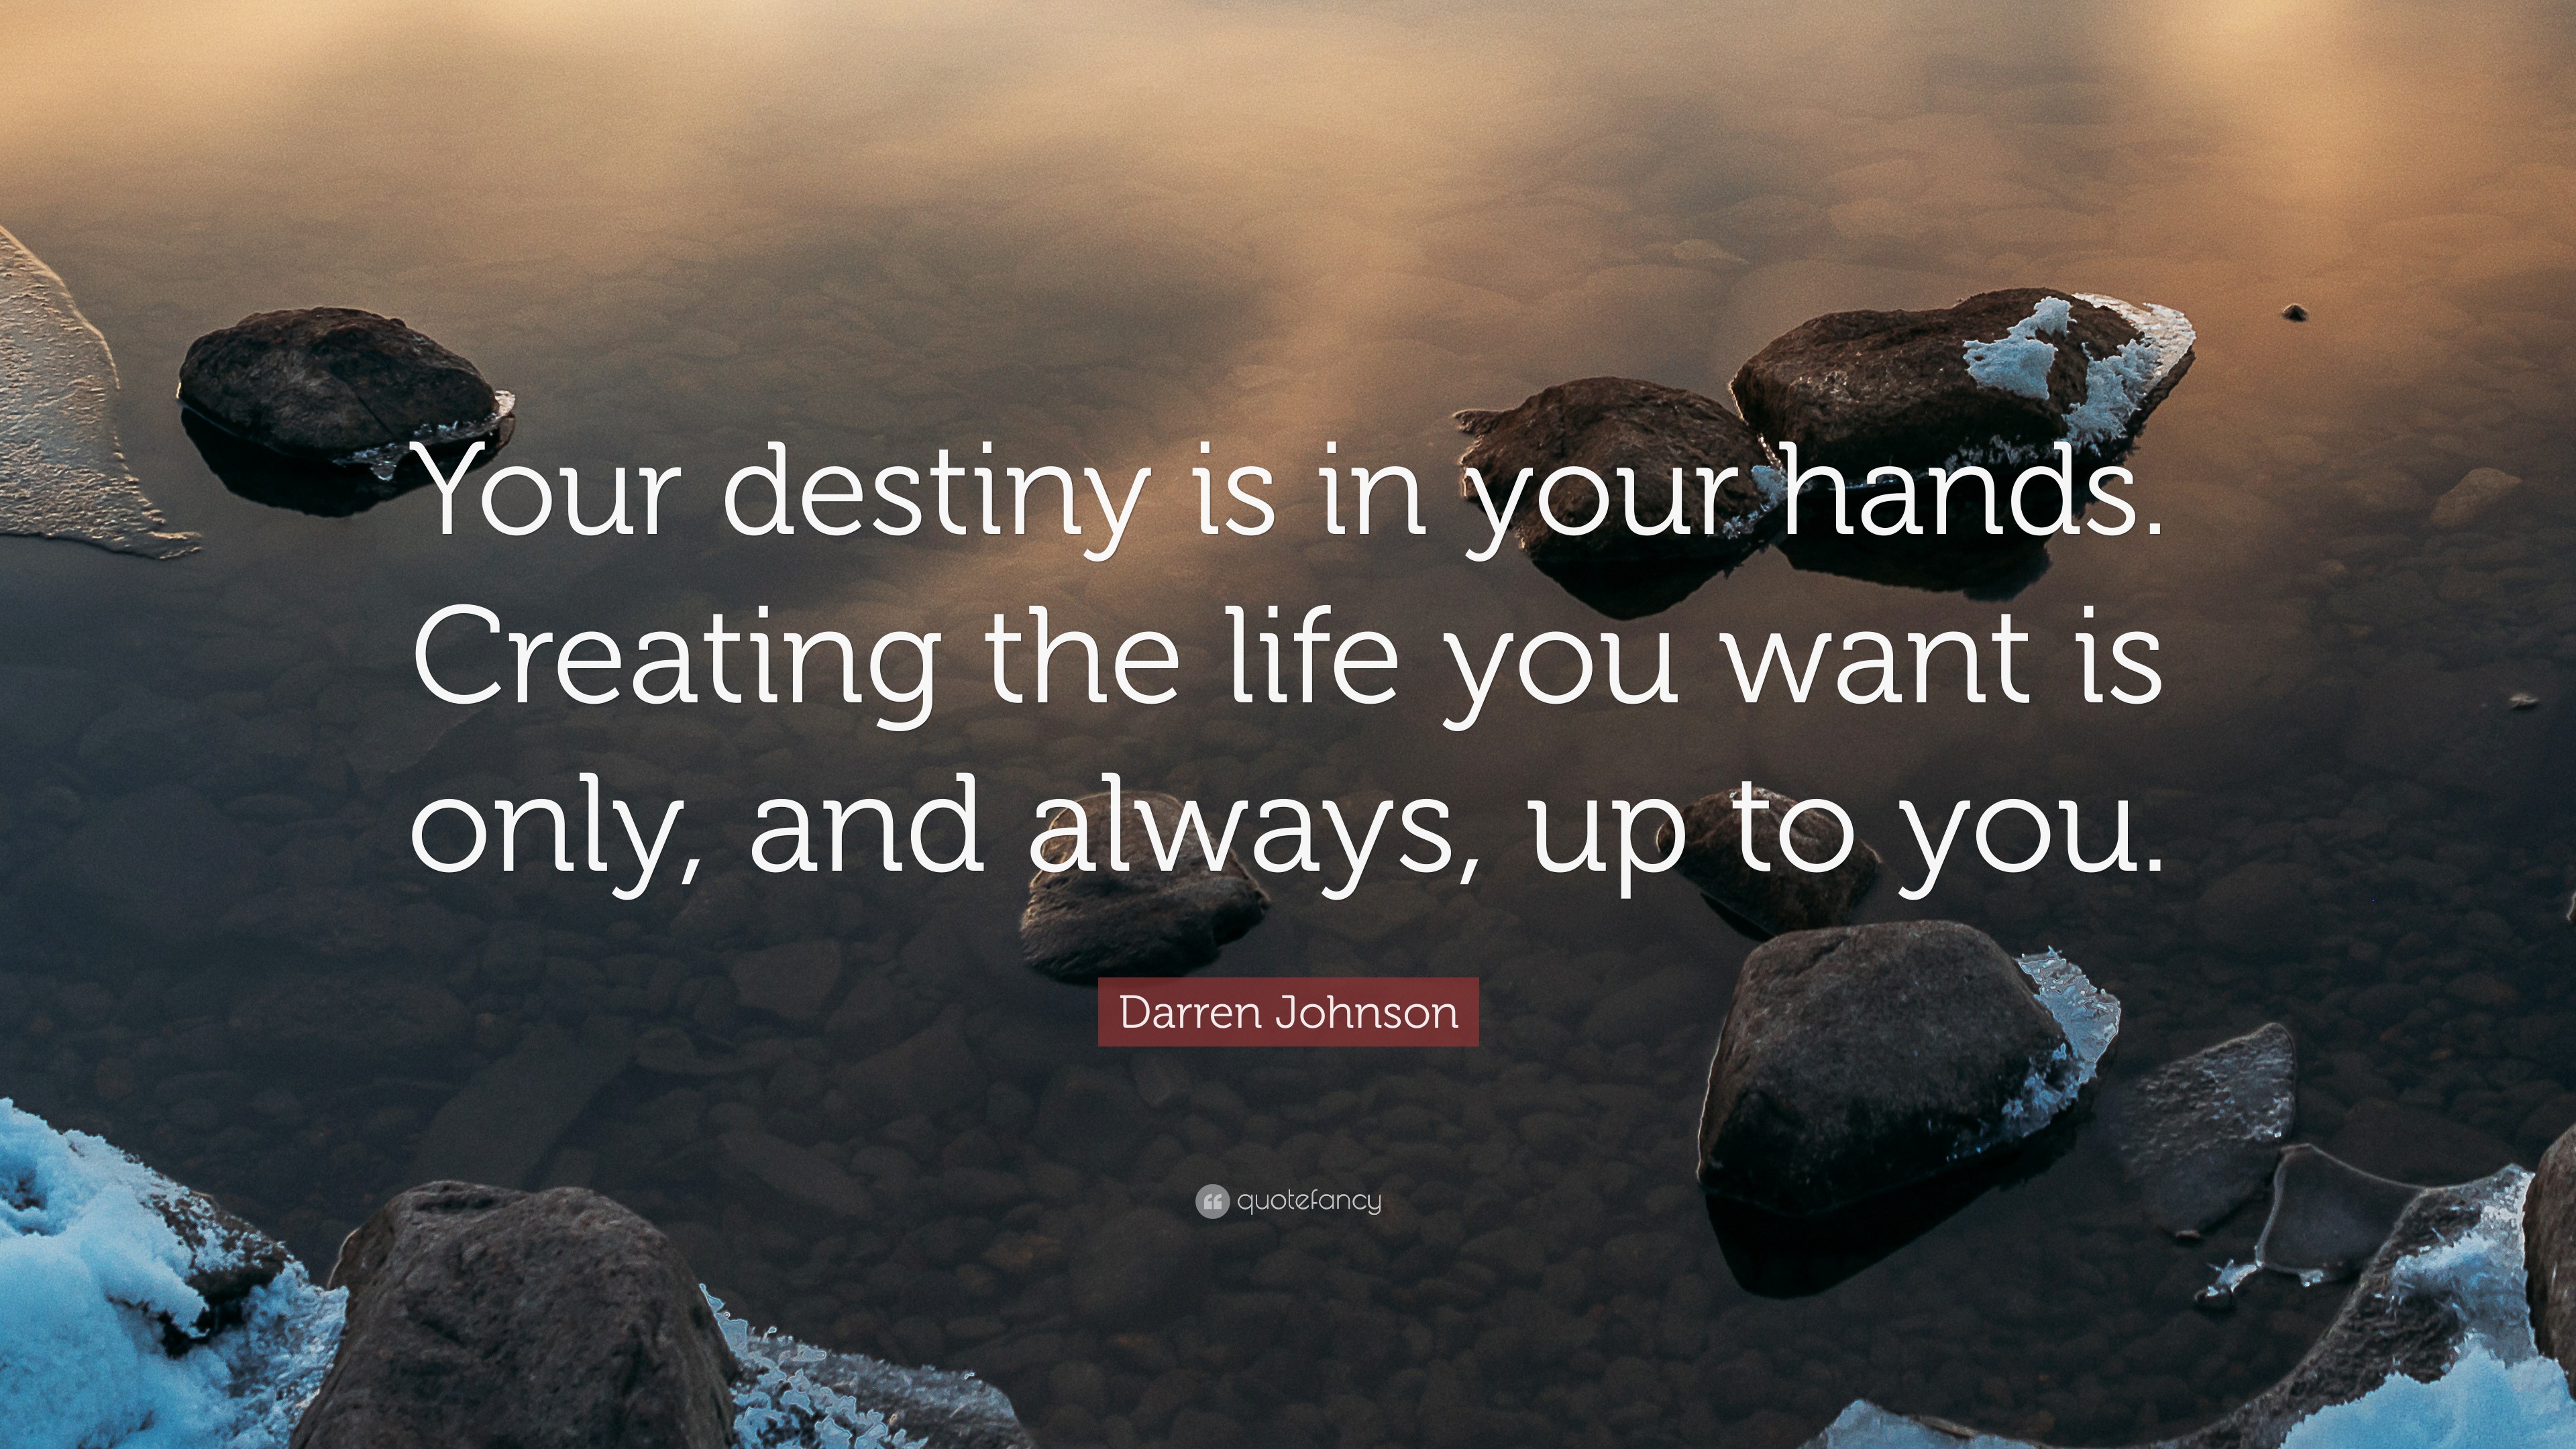 Darren Johnson Quote: “Your destiny is in your hands. Creating the life ...